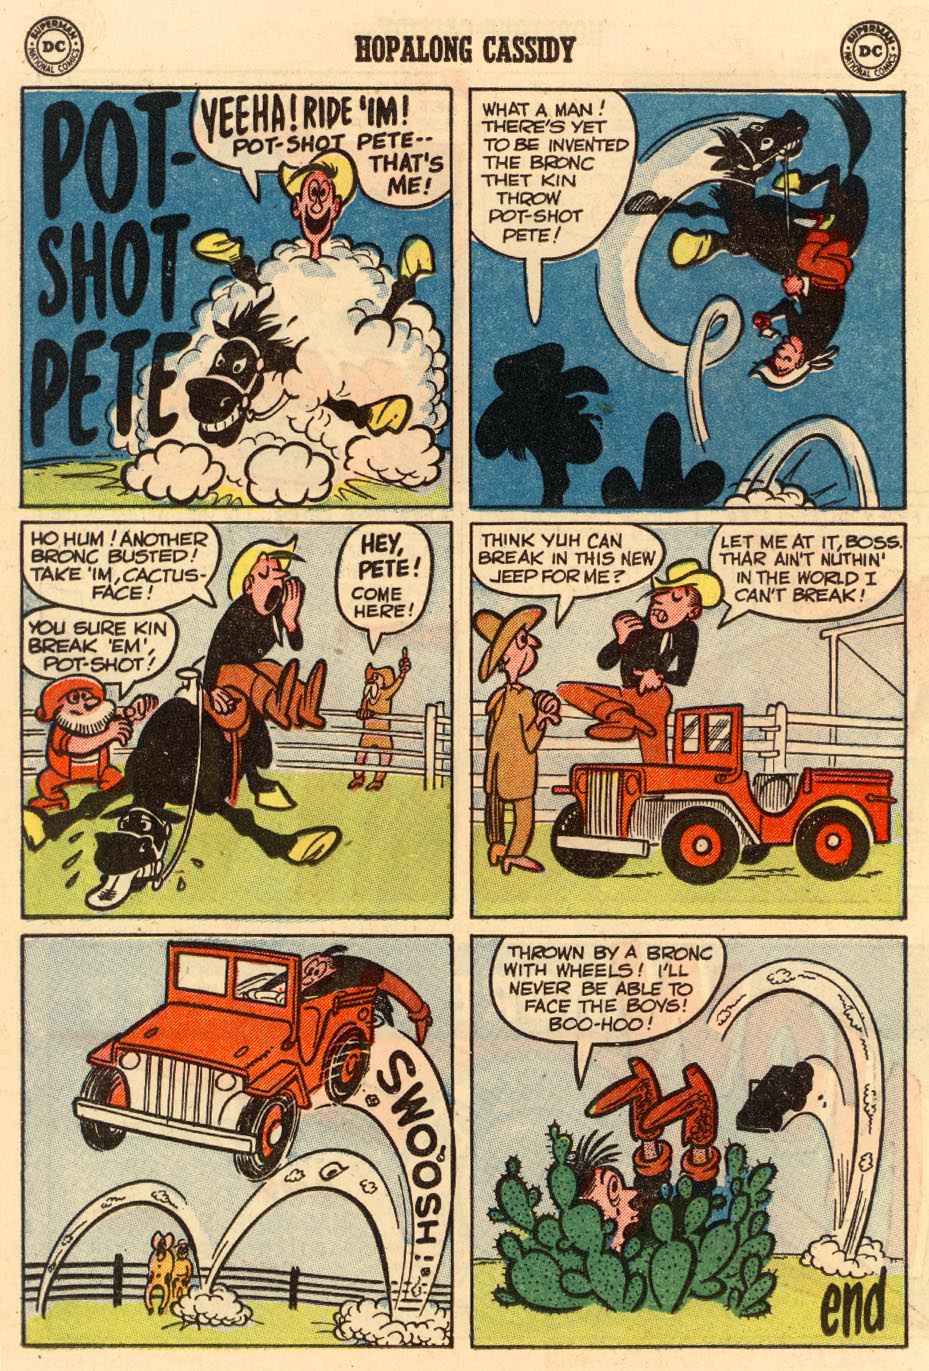 Read online Hopalong Cassidy comic -  Issue #97 - 22